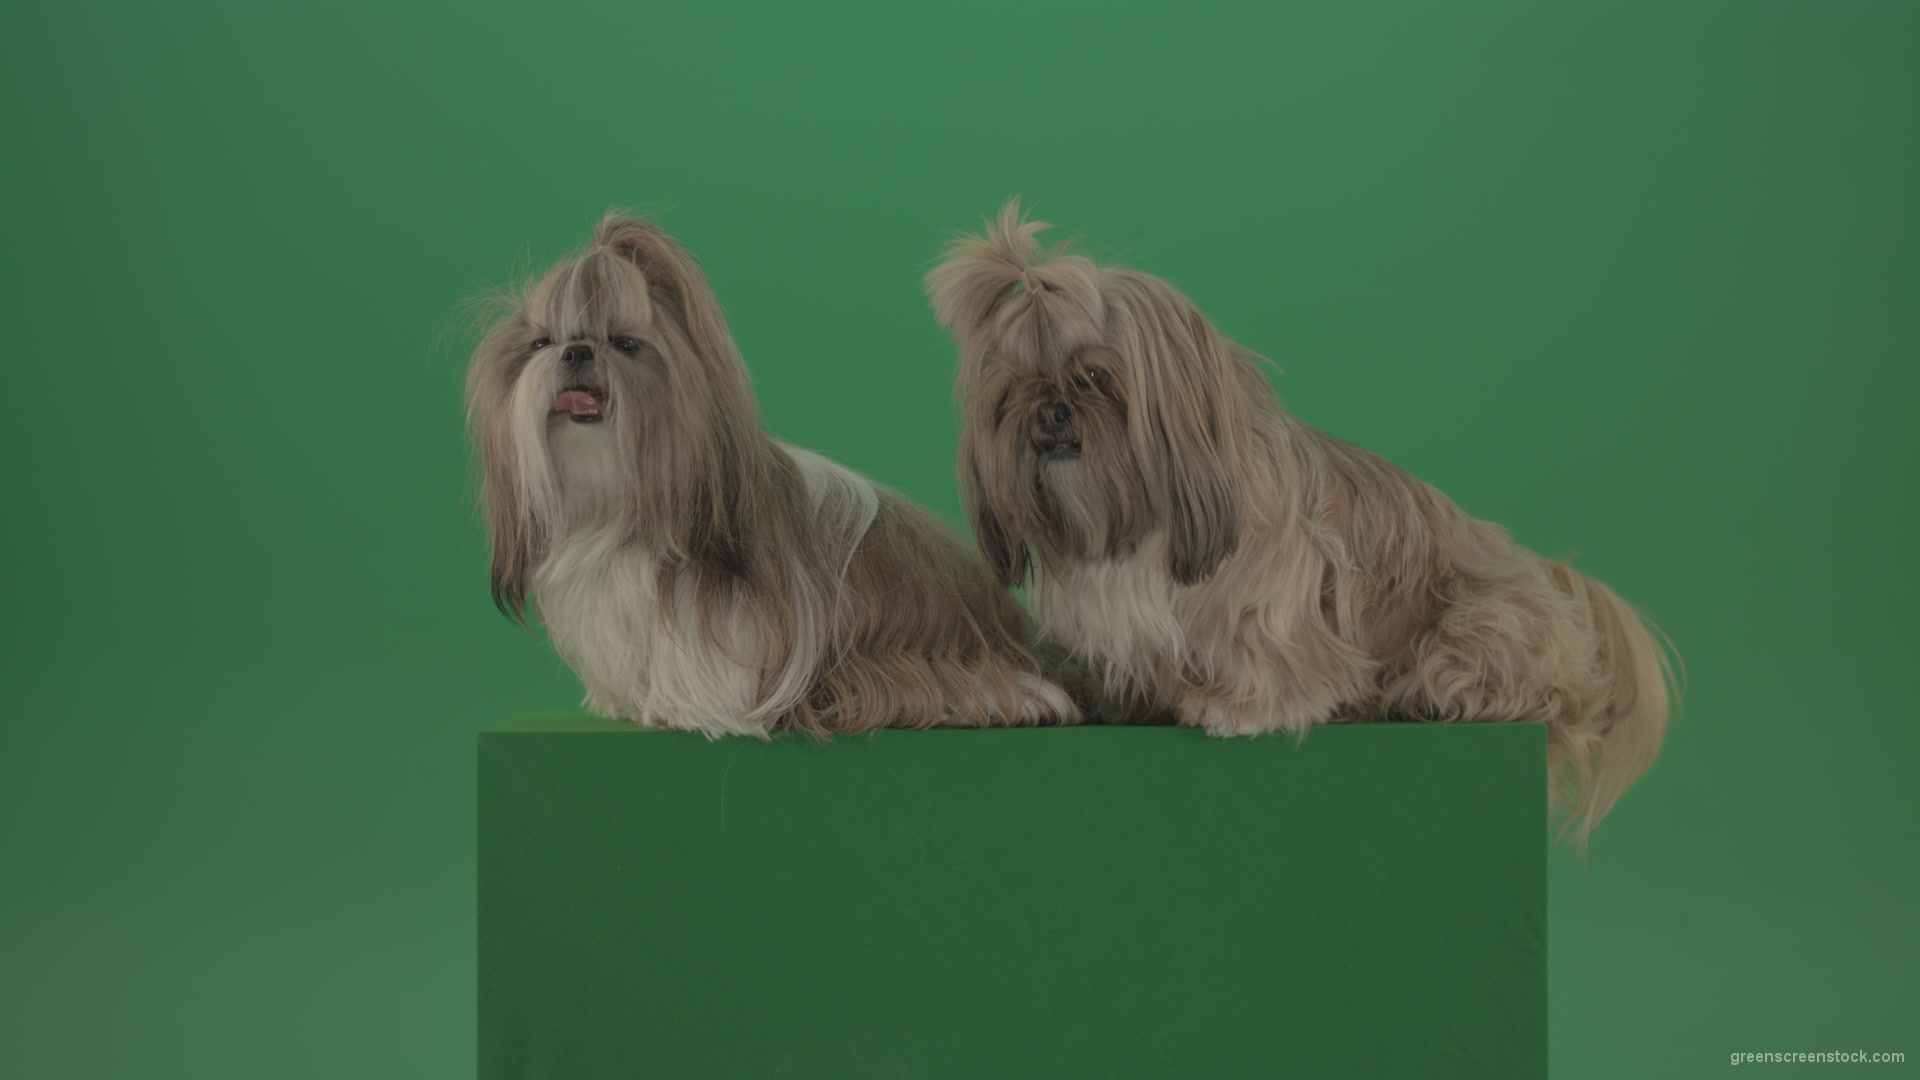 Awards-winners-Shih-tzu-fashion-luxury-expensive-dog-in-side-view-isolated-on-green-screen_009 Green Screen Stock